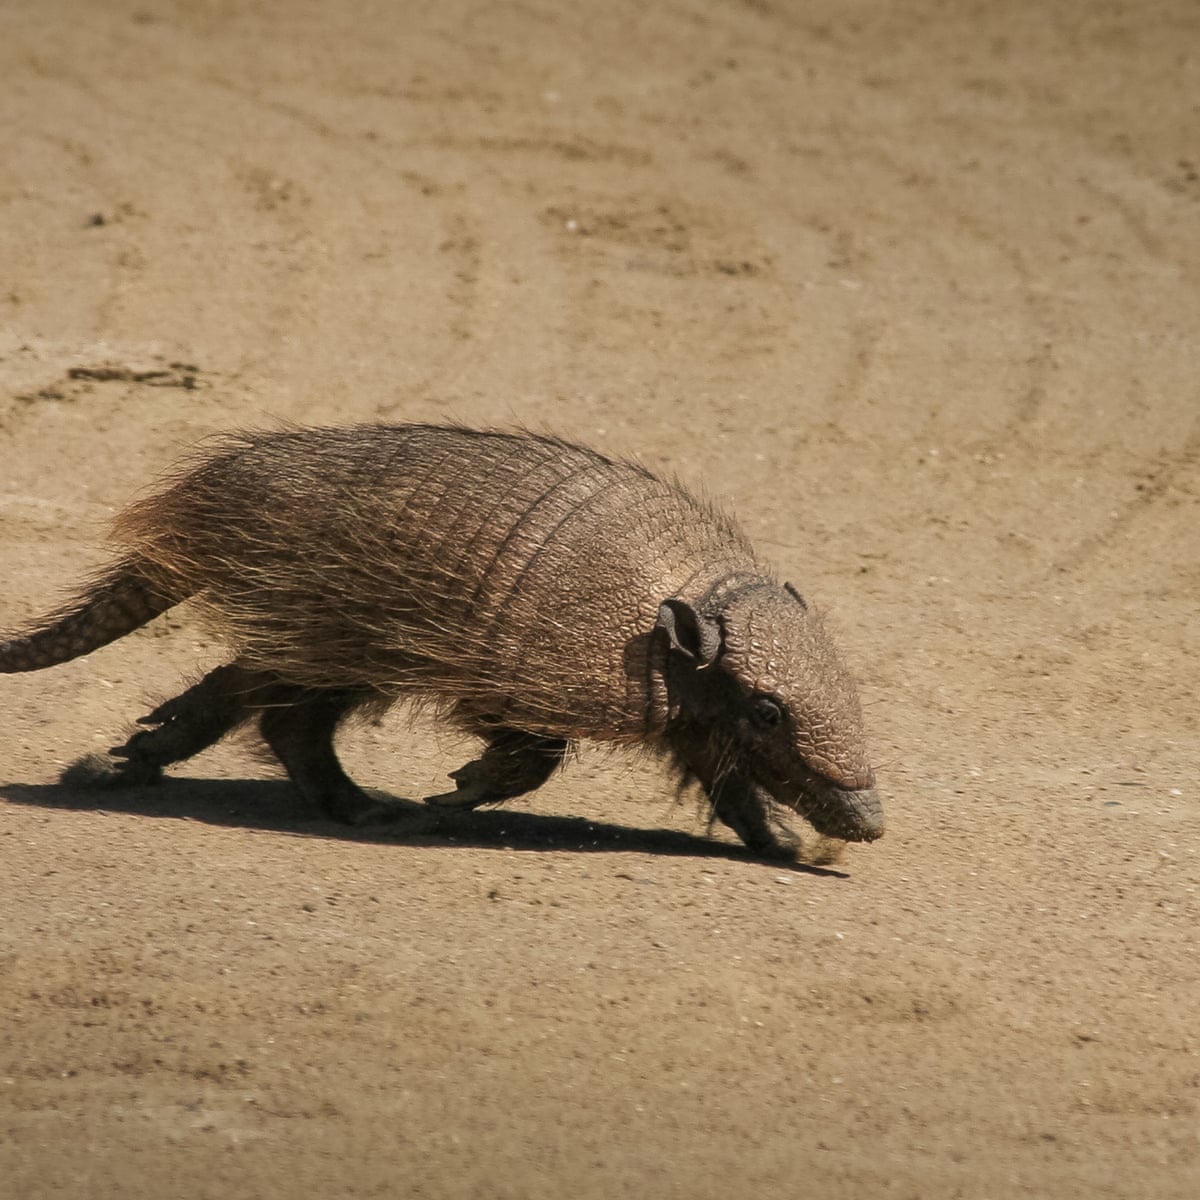 Home to the screaming hairy armadillo: the forest the world forgot |  Environment | The Guardian